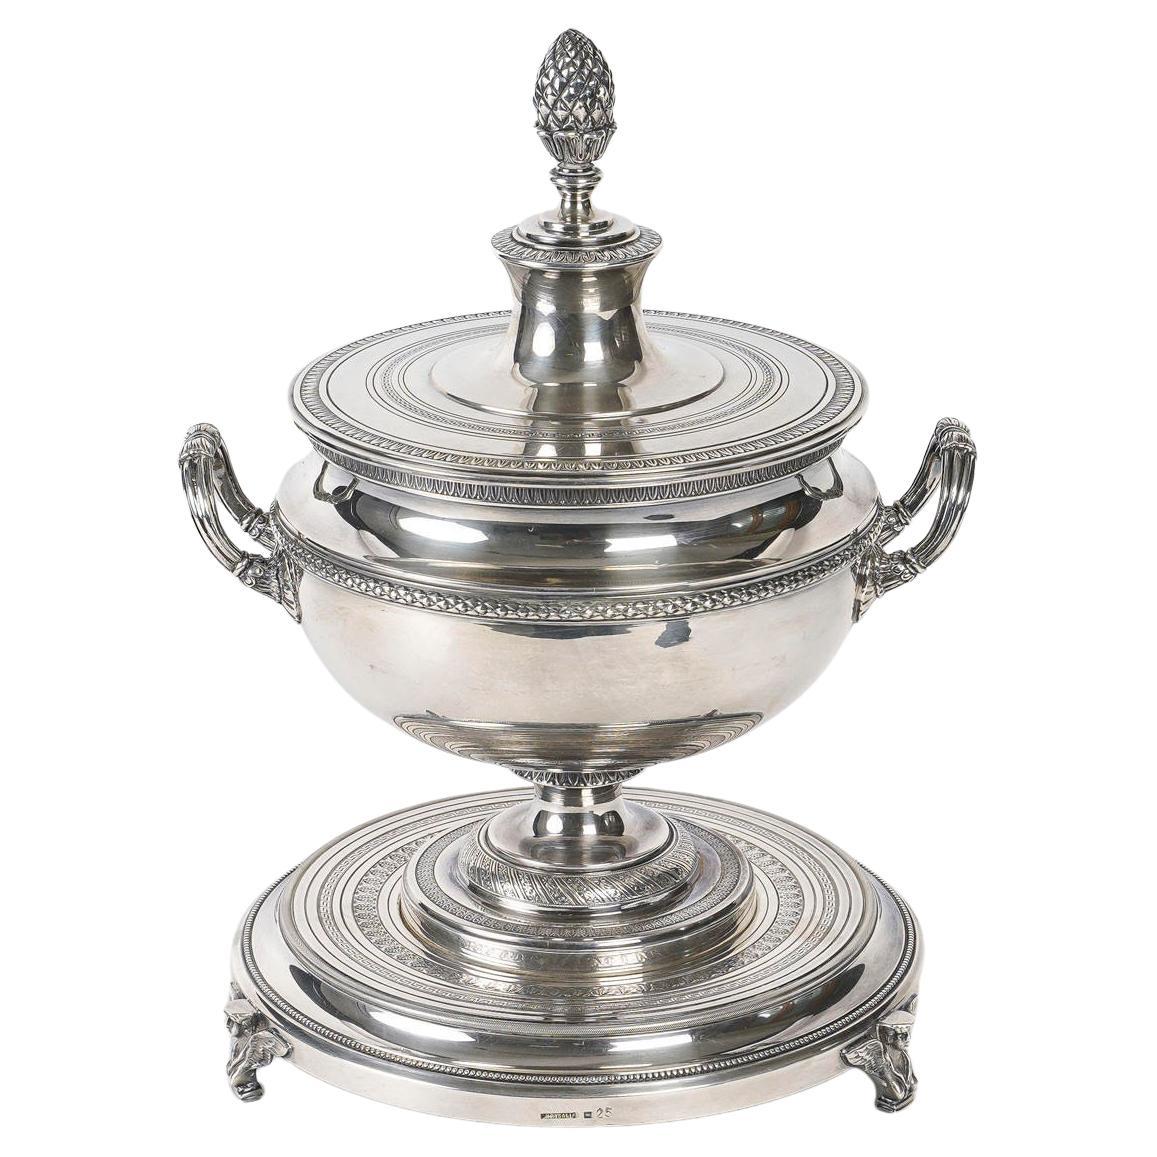 Soup Tureen or Centrepiece from the House of CHRYSALIA Goldsmith, Napoleon III. For Sale